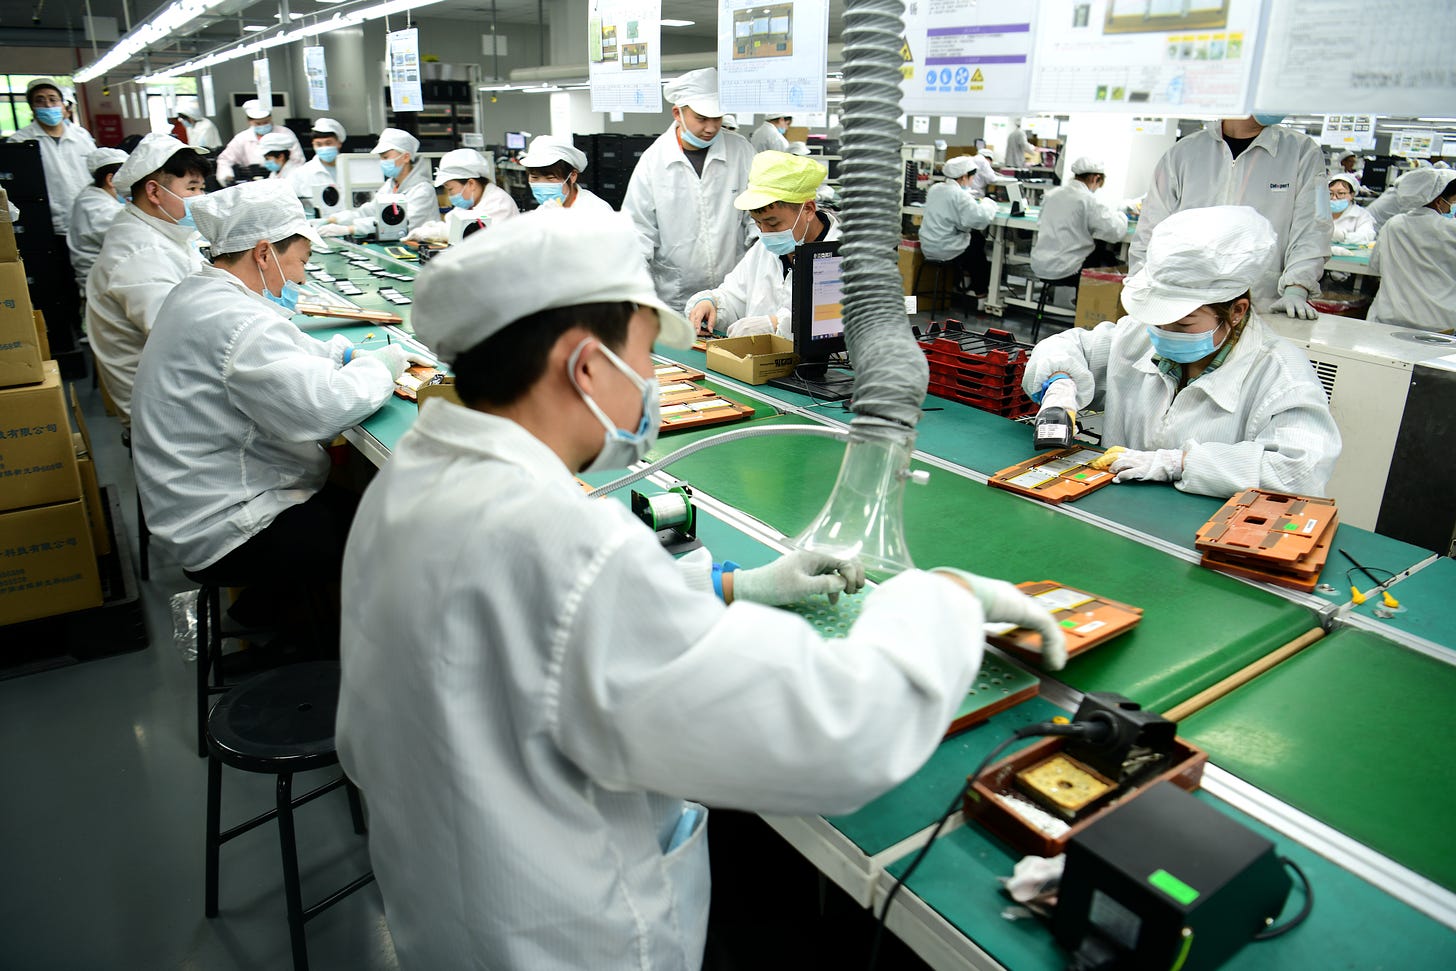 Workers rush to make orders for lithium battery products at workshop in Nantong, Jiangsu province, March 14, 2022. (Costfoto/Future Publishing via Getty Images)